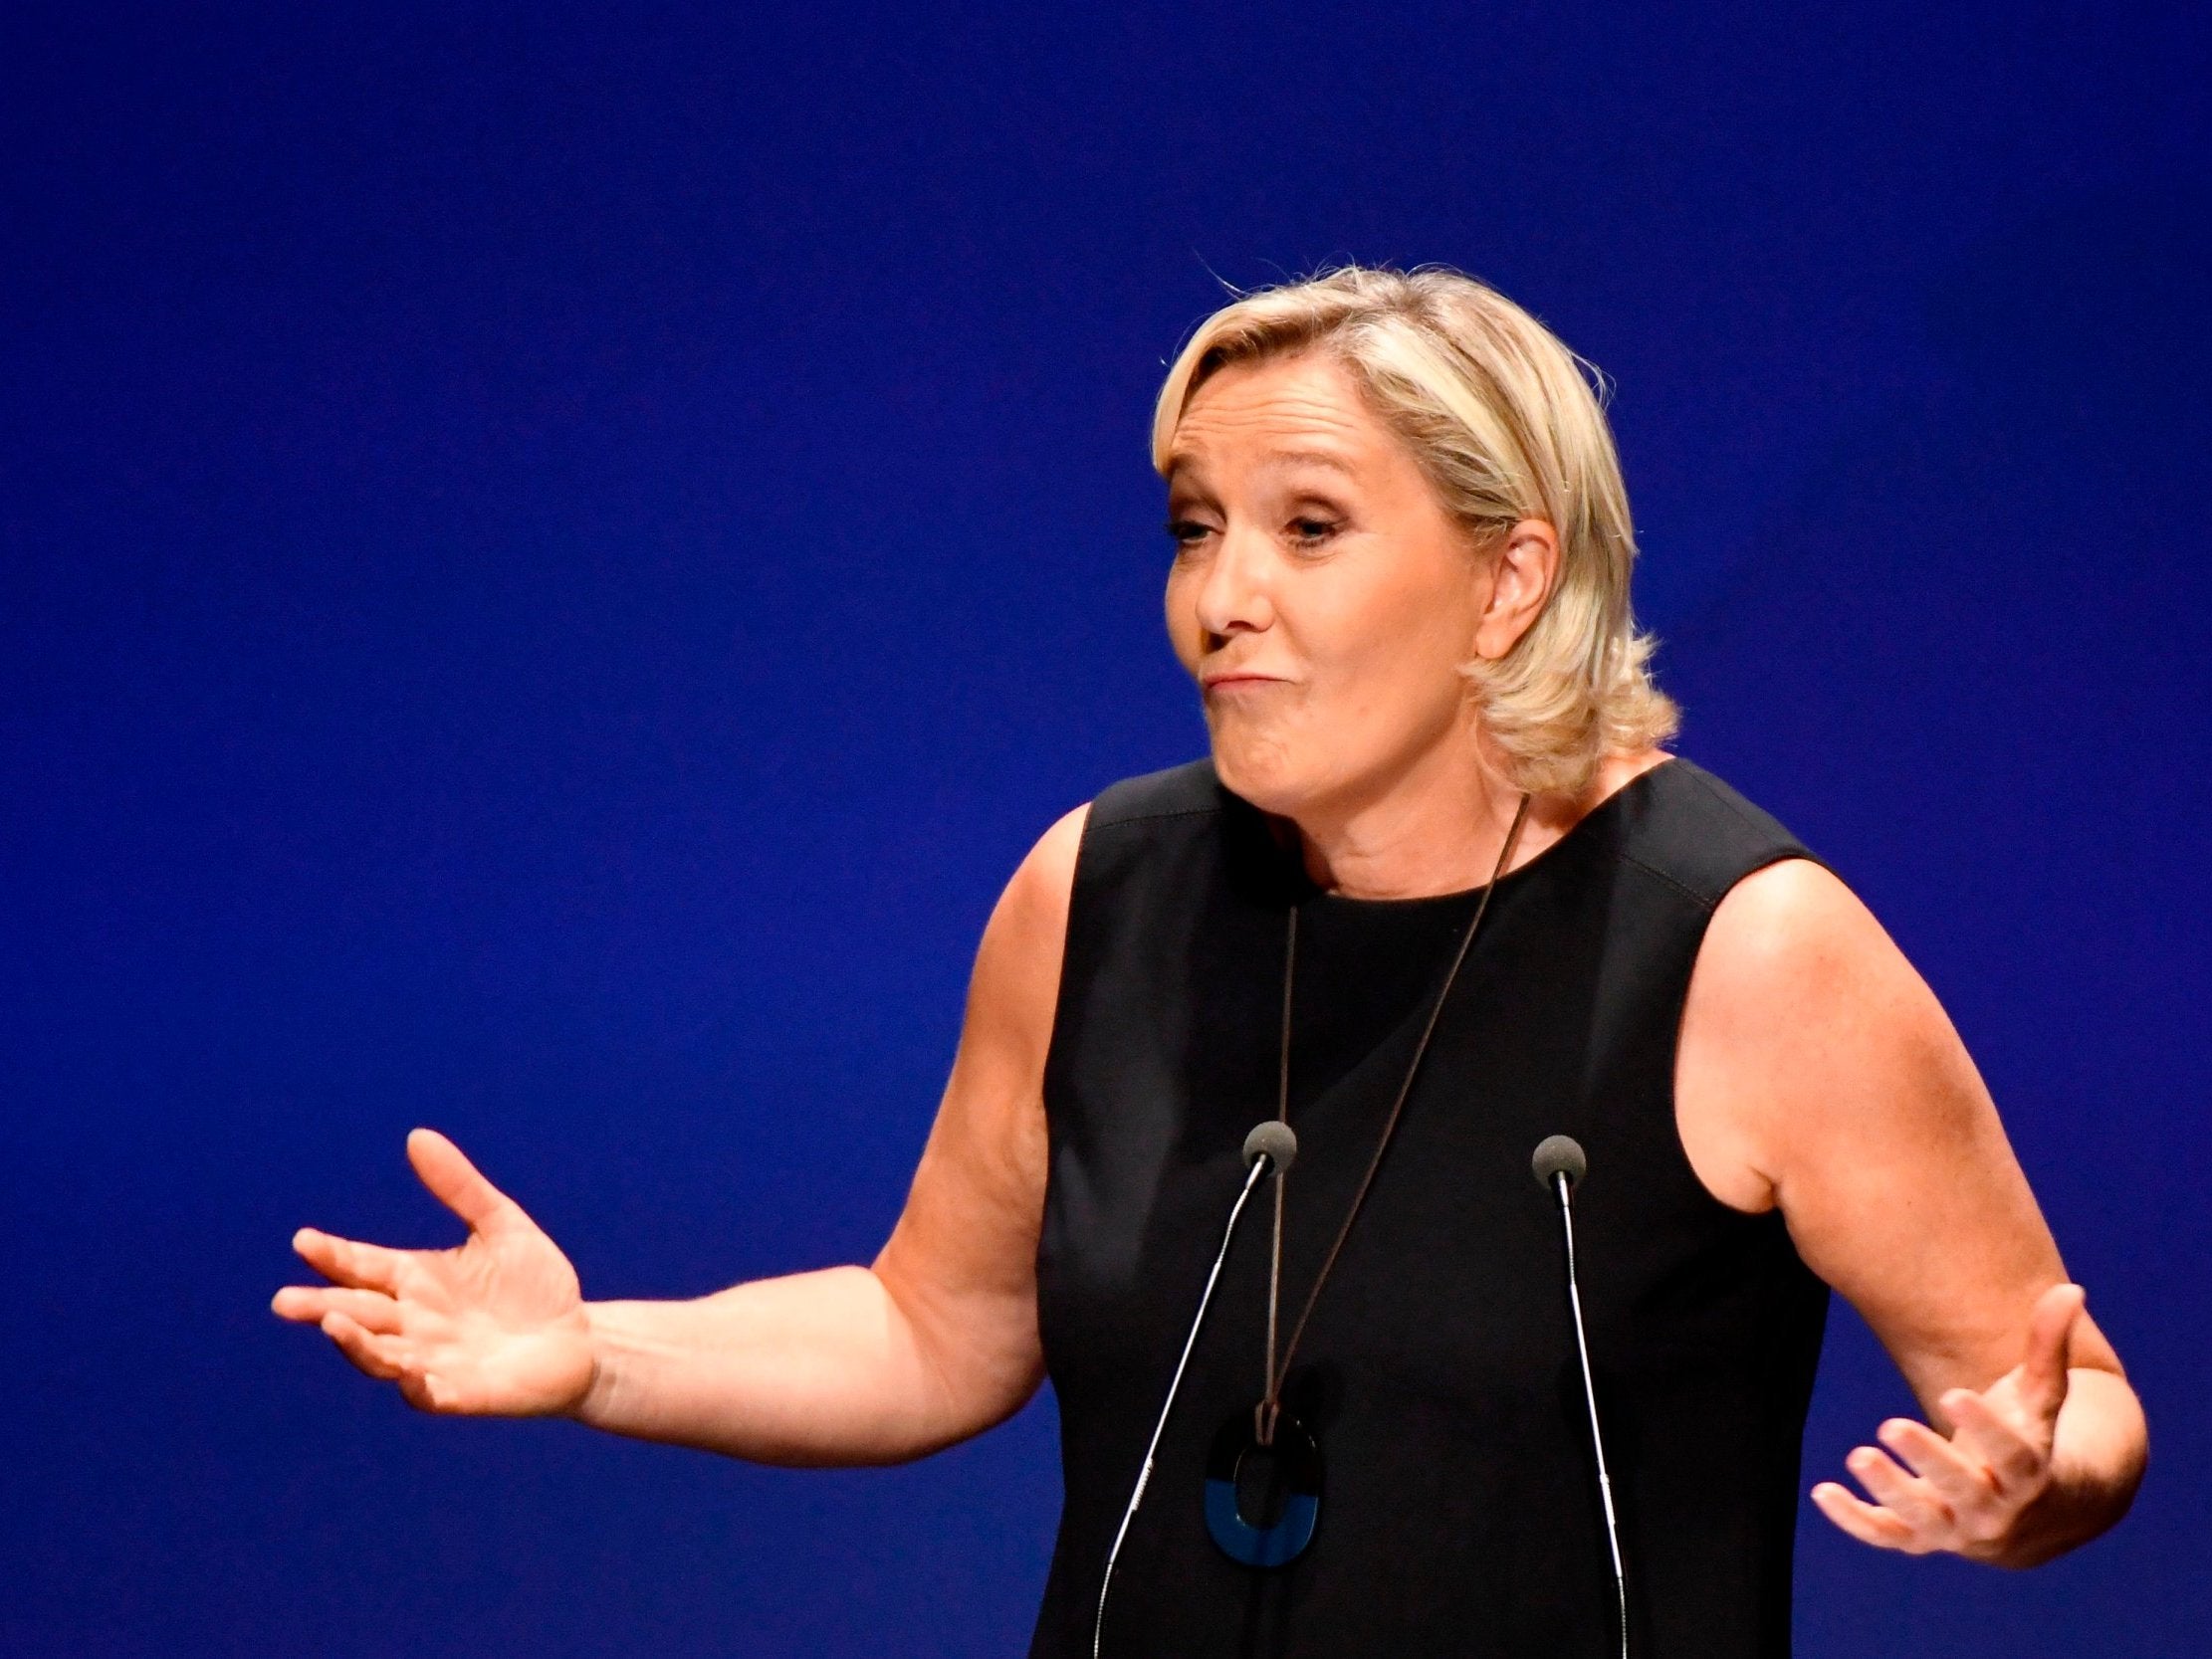 Marine Le Pen refused to undergo a court-ordered mental health evaluation